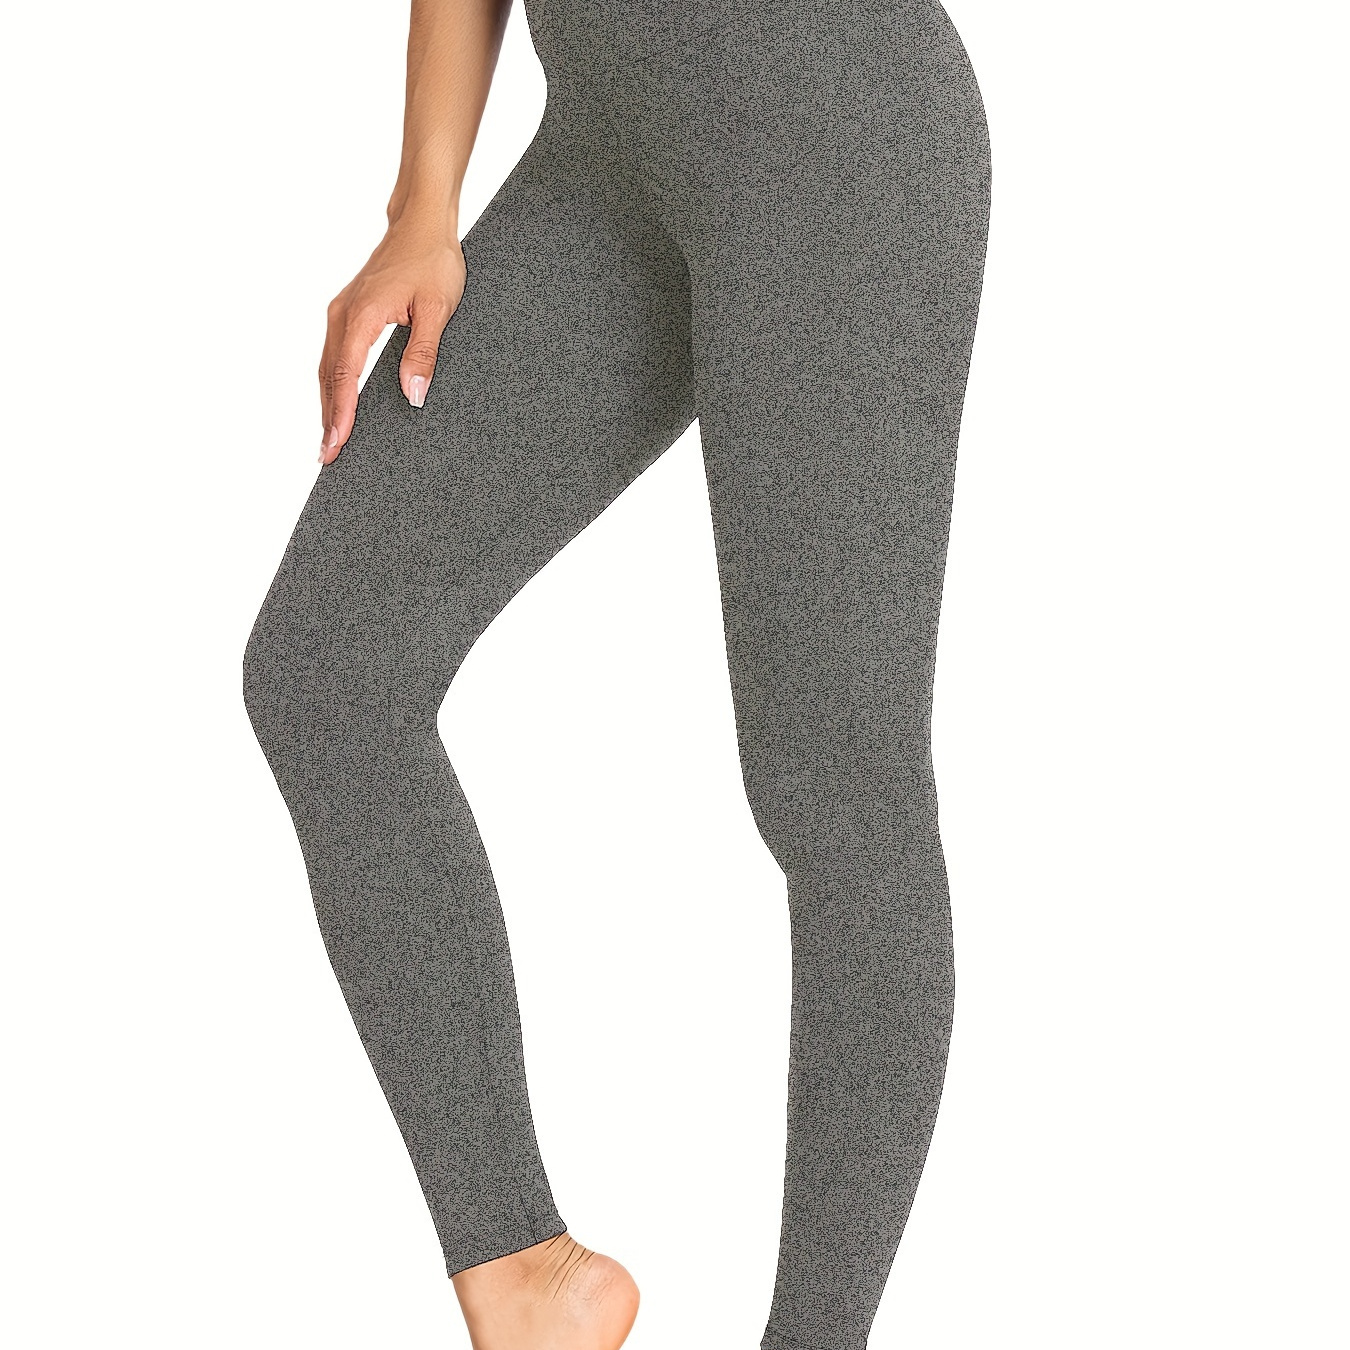 

Super Soft Leggings For Women, High Waisted Tummy Control No See Through Workout Yoga Running Pants Leggings